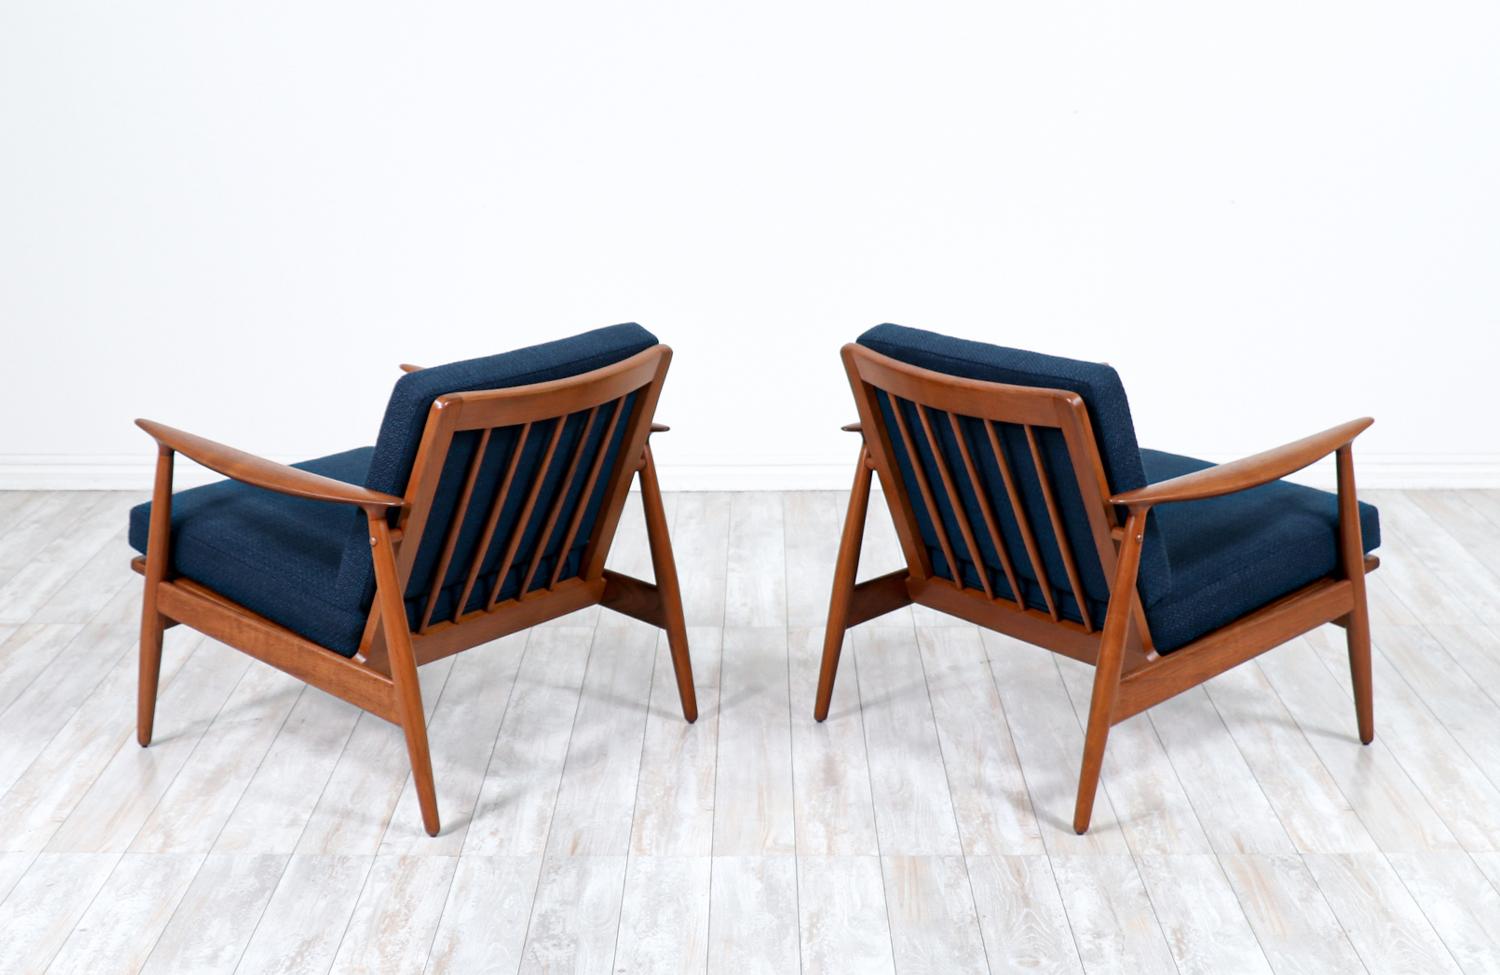 Expertly Restored - Danish Modern Sculpted Teak Lounge Chairs by John Bone In Excellent Condition For Sale In Los Angeles, CA